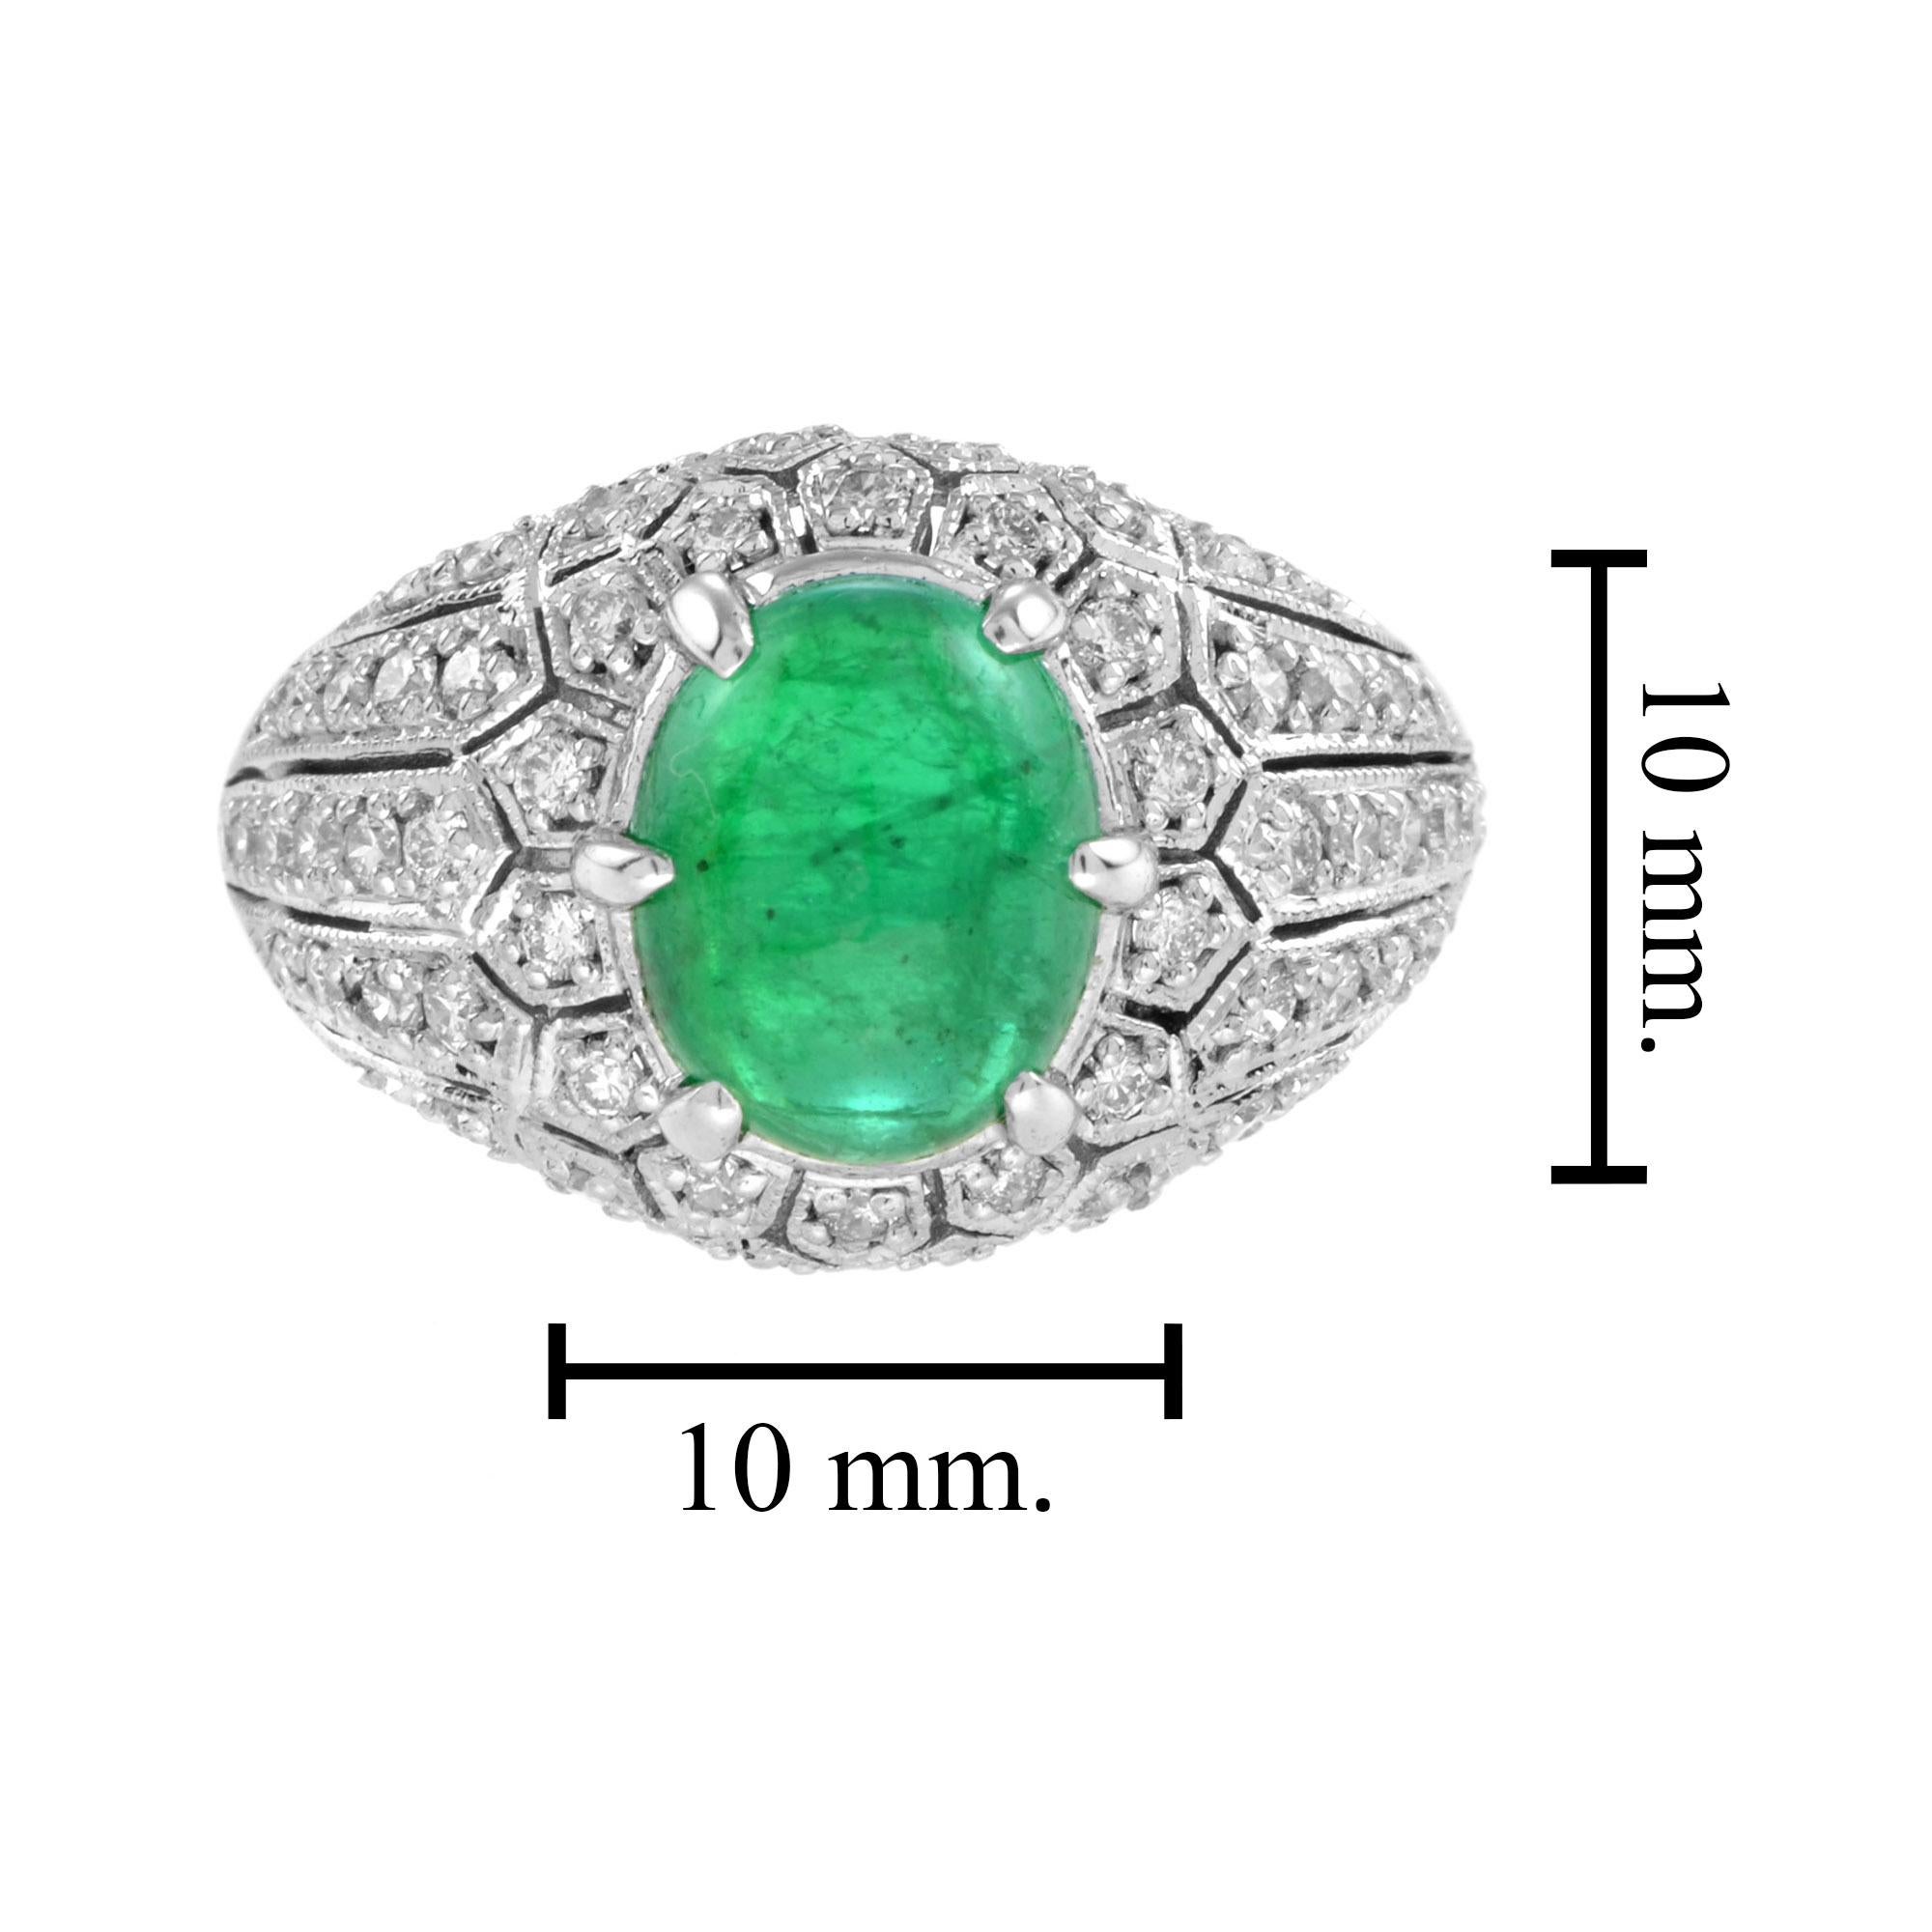 Cabochon Emerald and Diamond Dome Ring in 14K White Gold 1